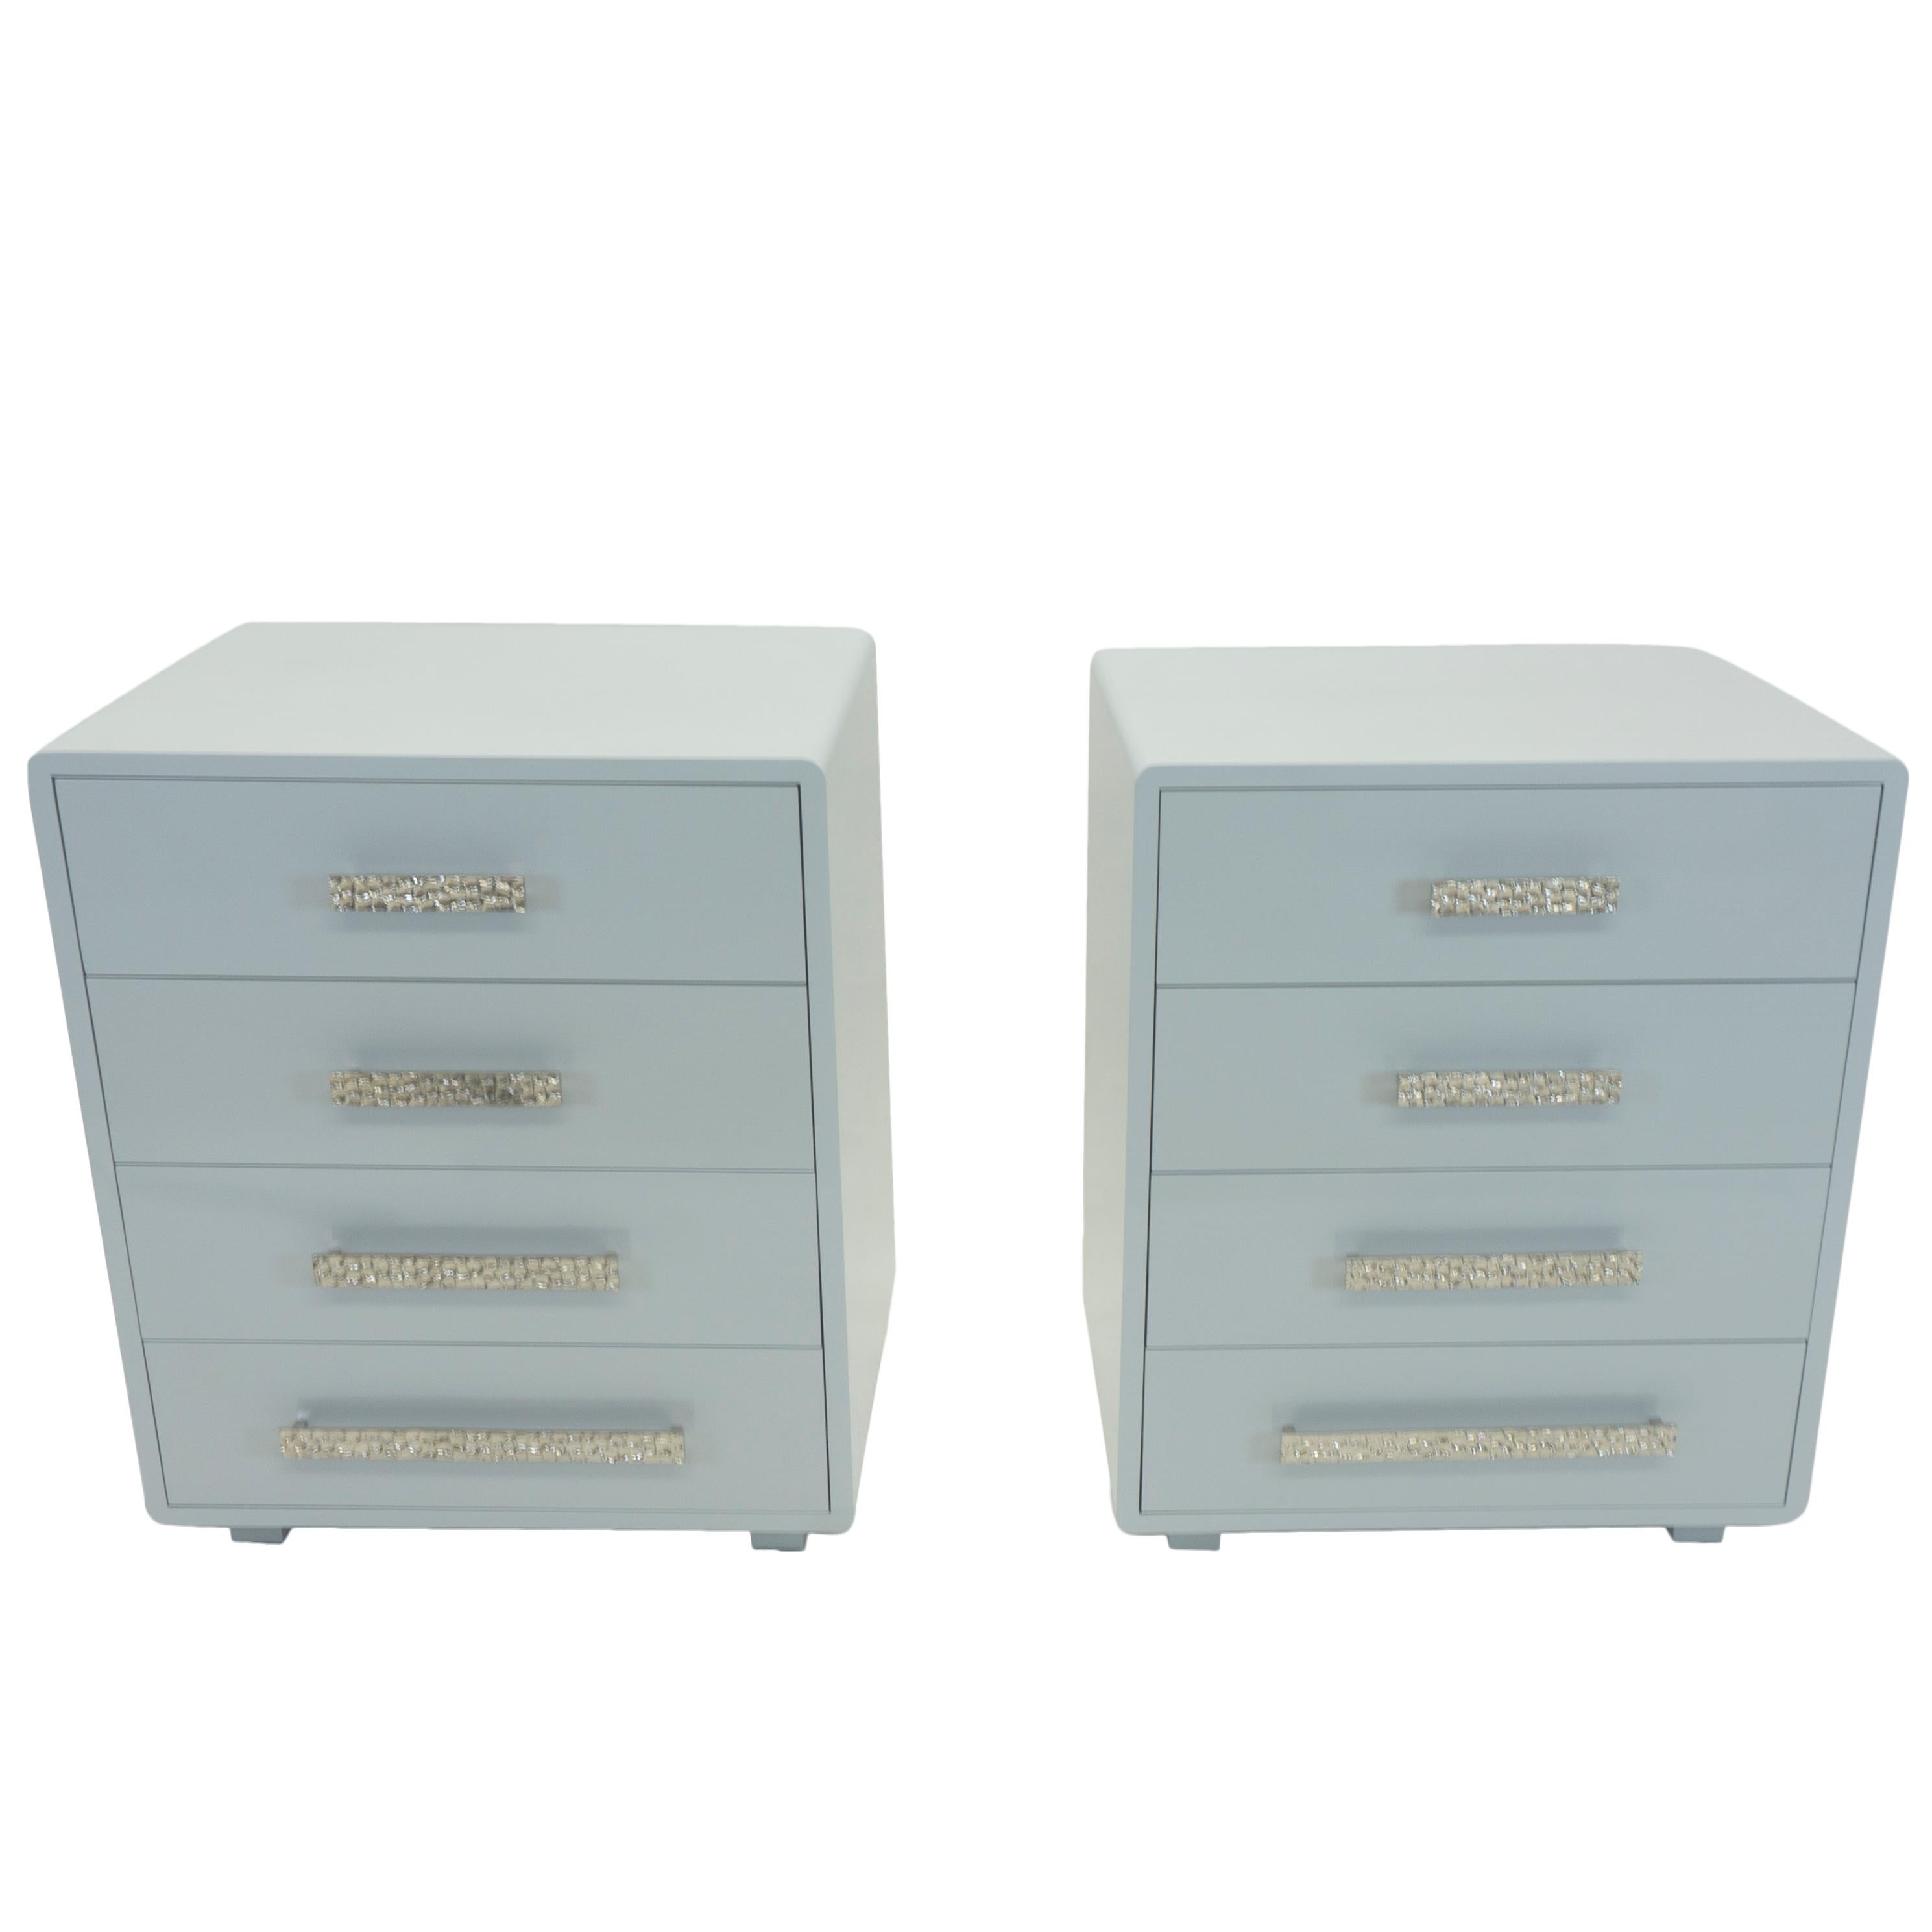 Our ladder bedside tables are both functional and chic. They feature short block legs and rounded edges lacquered in a glossy grey/blue. The tables are equipped with specialty metal handles that are placed in ascending and descending sizes on four